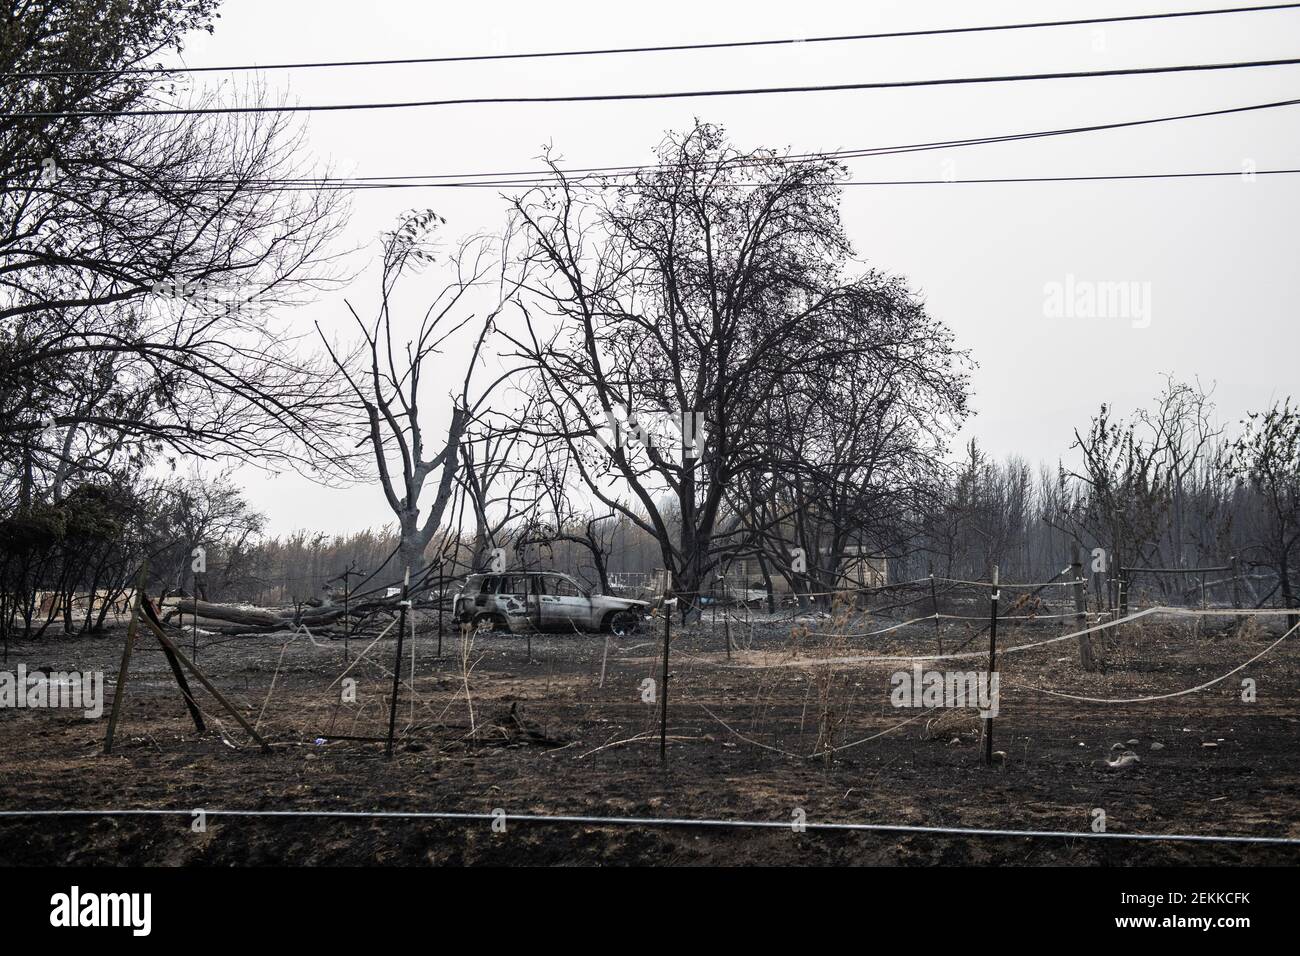 PHOENIX, ORE - SEPTEMBER 18, 2020: A general view of the aftermath of the Almeda Fire. The town of Phoenix, Oregon, showing the burned out homes, cars and rubble left behind. In Phoenix, about 20 miles north of the California border, homes were charred beyond recognition. Across the western US, at least 87 wildfires are burning, according to the National Interagency Fire Center. They've torched more than 4.7 million acres -- more than six times the area of Rhode Island. Credit: Chris Tuite/imageSPACE/Sipa USA Stock Photo